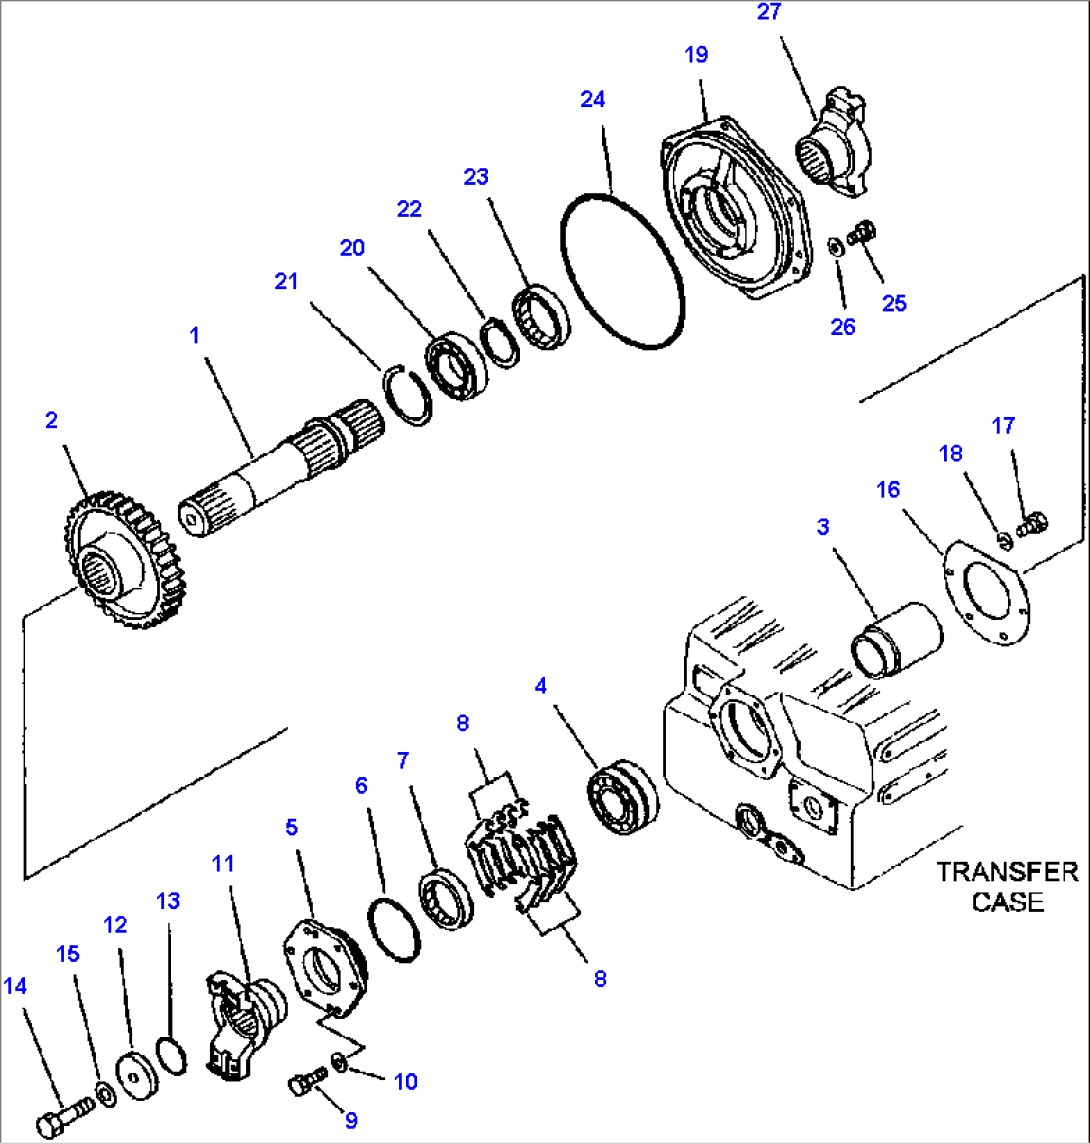 FIG NO. 2516 TRANSMISSION TRANSFER CASE LOWER OUTPUT GEARS